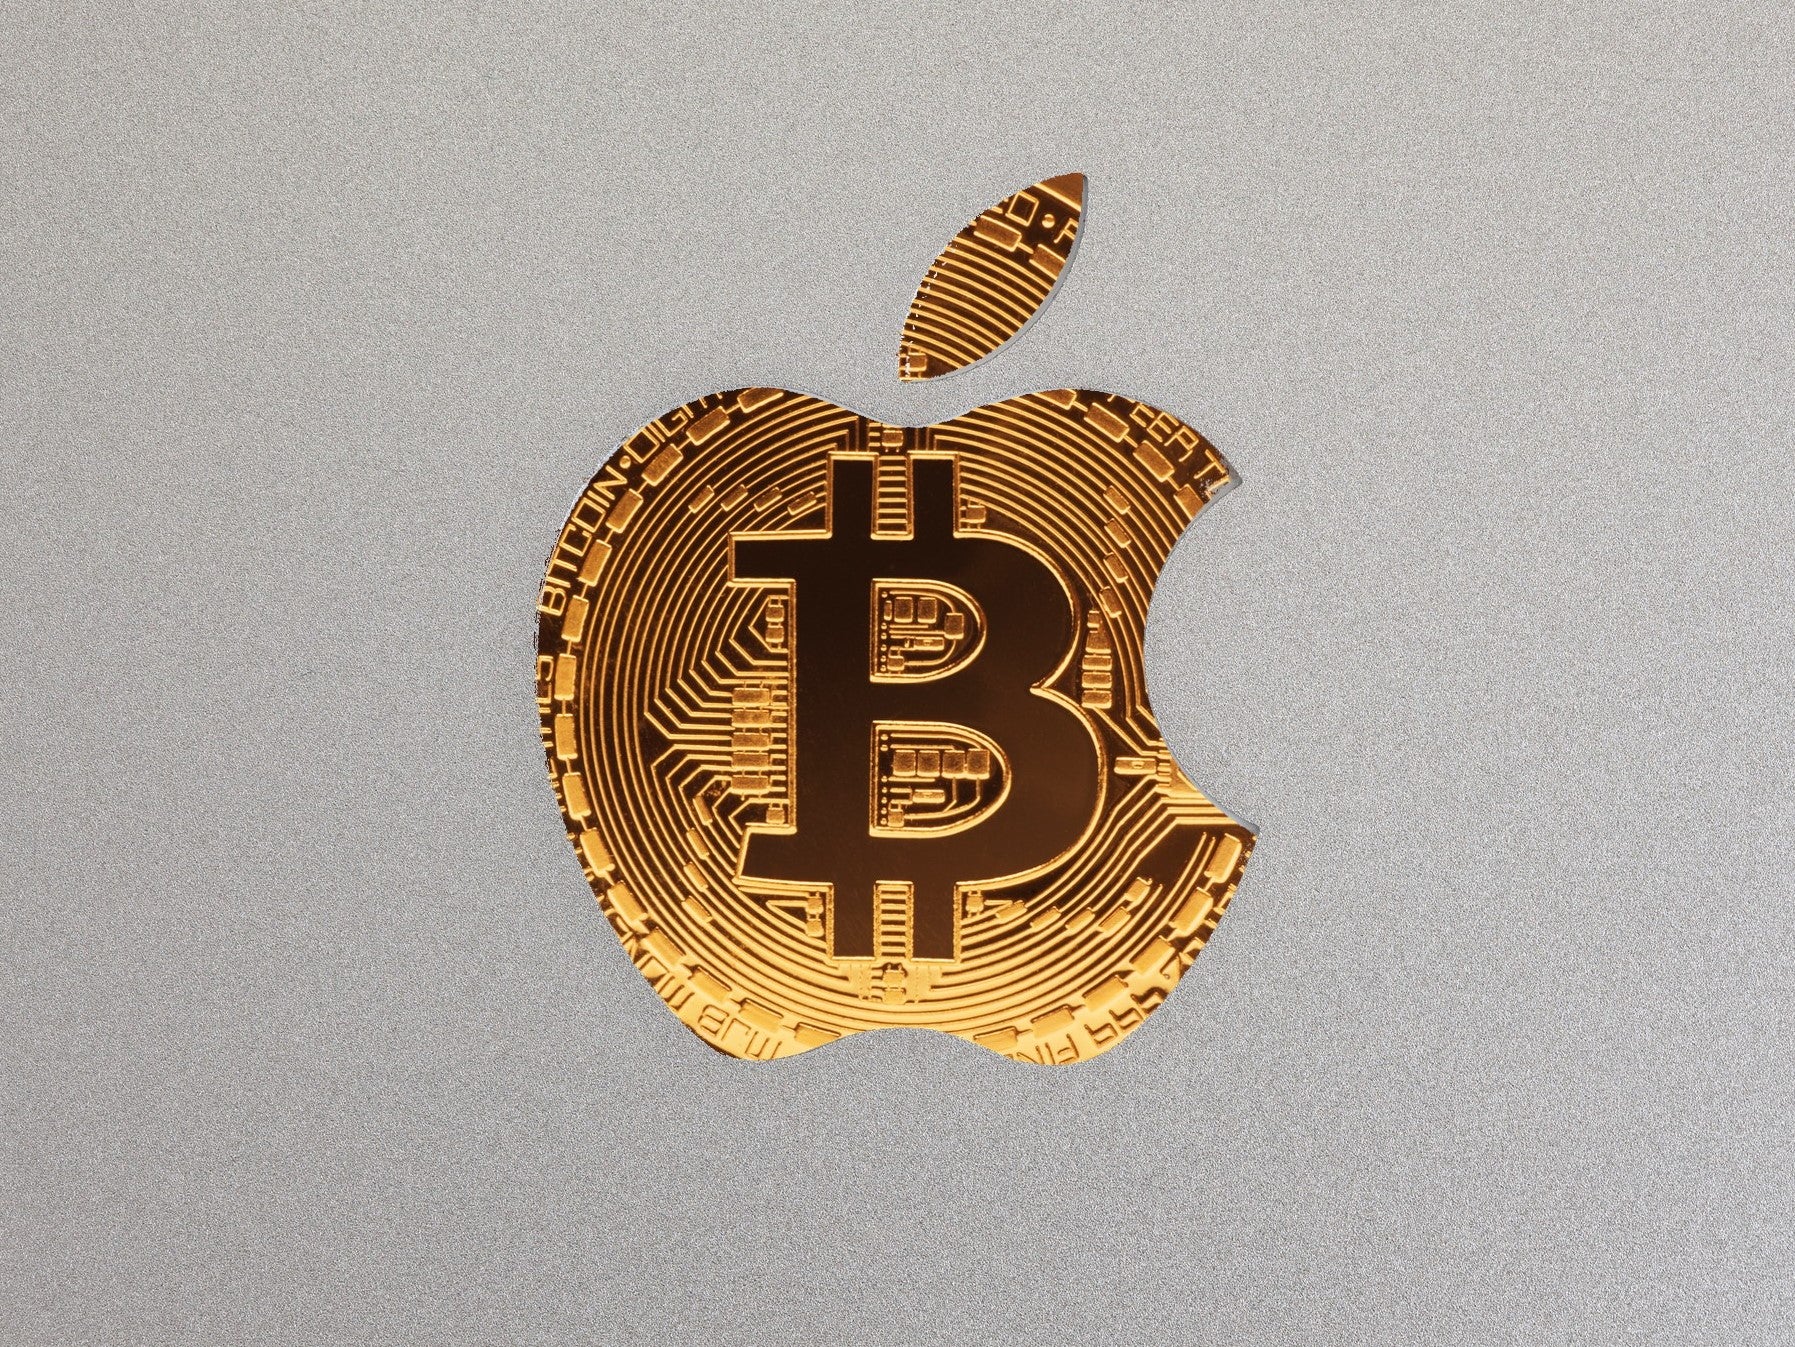 Bitcoin’s latest price rally means the crypto market is now valued higher than Apple